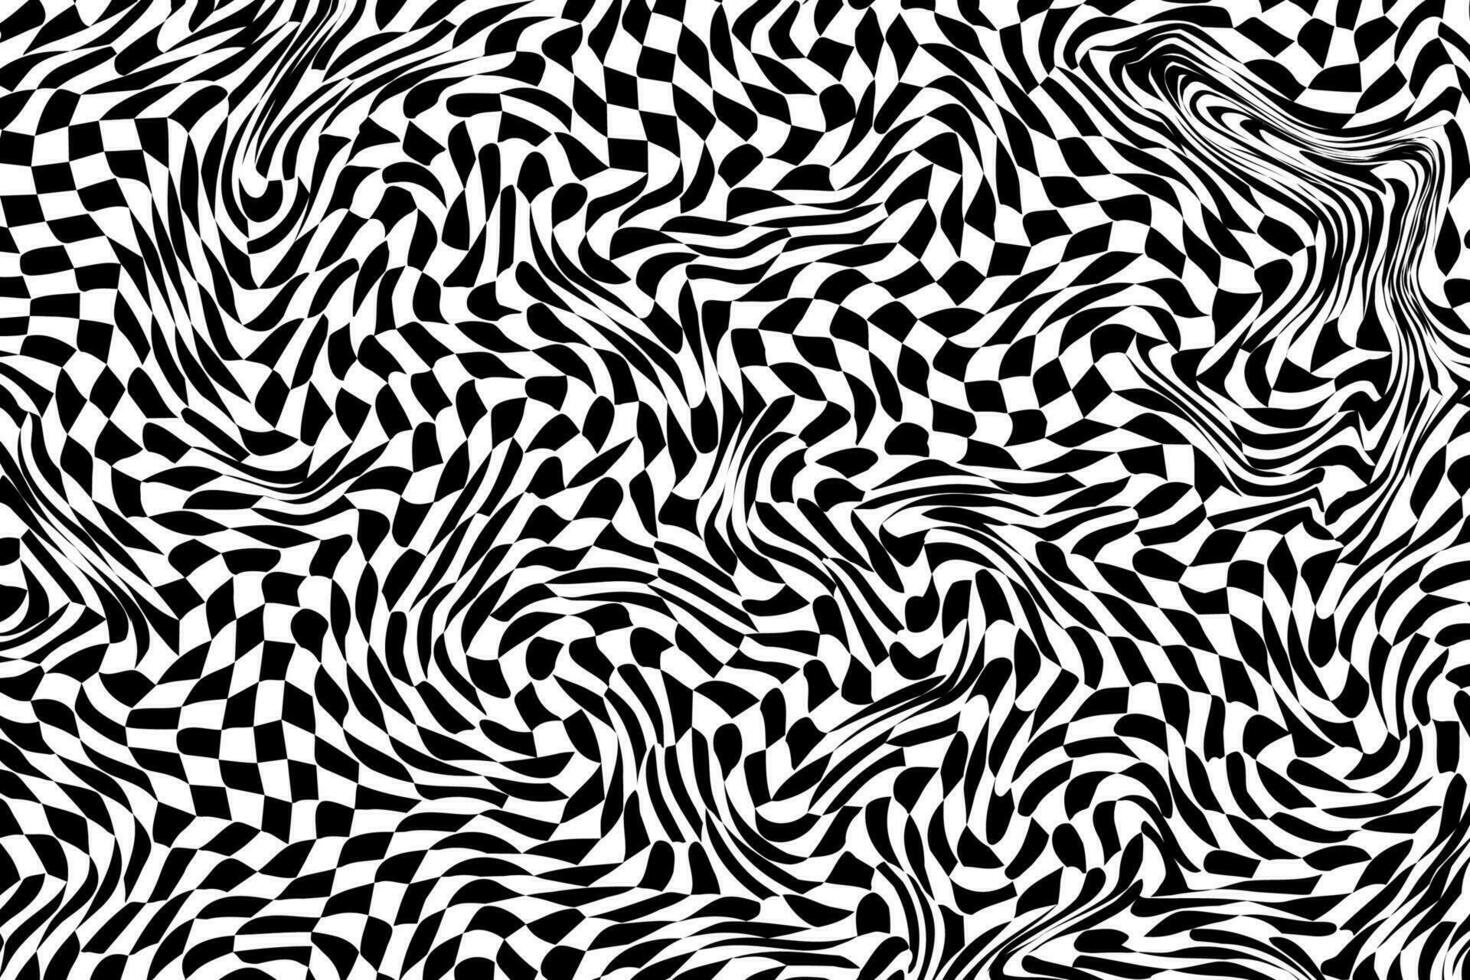 distorted black and white waves background vector